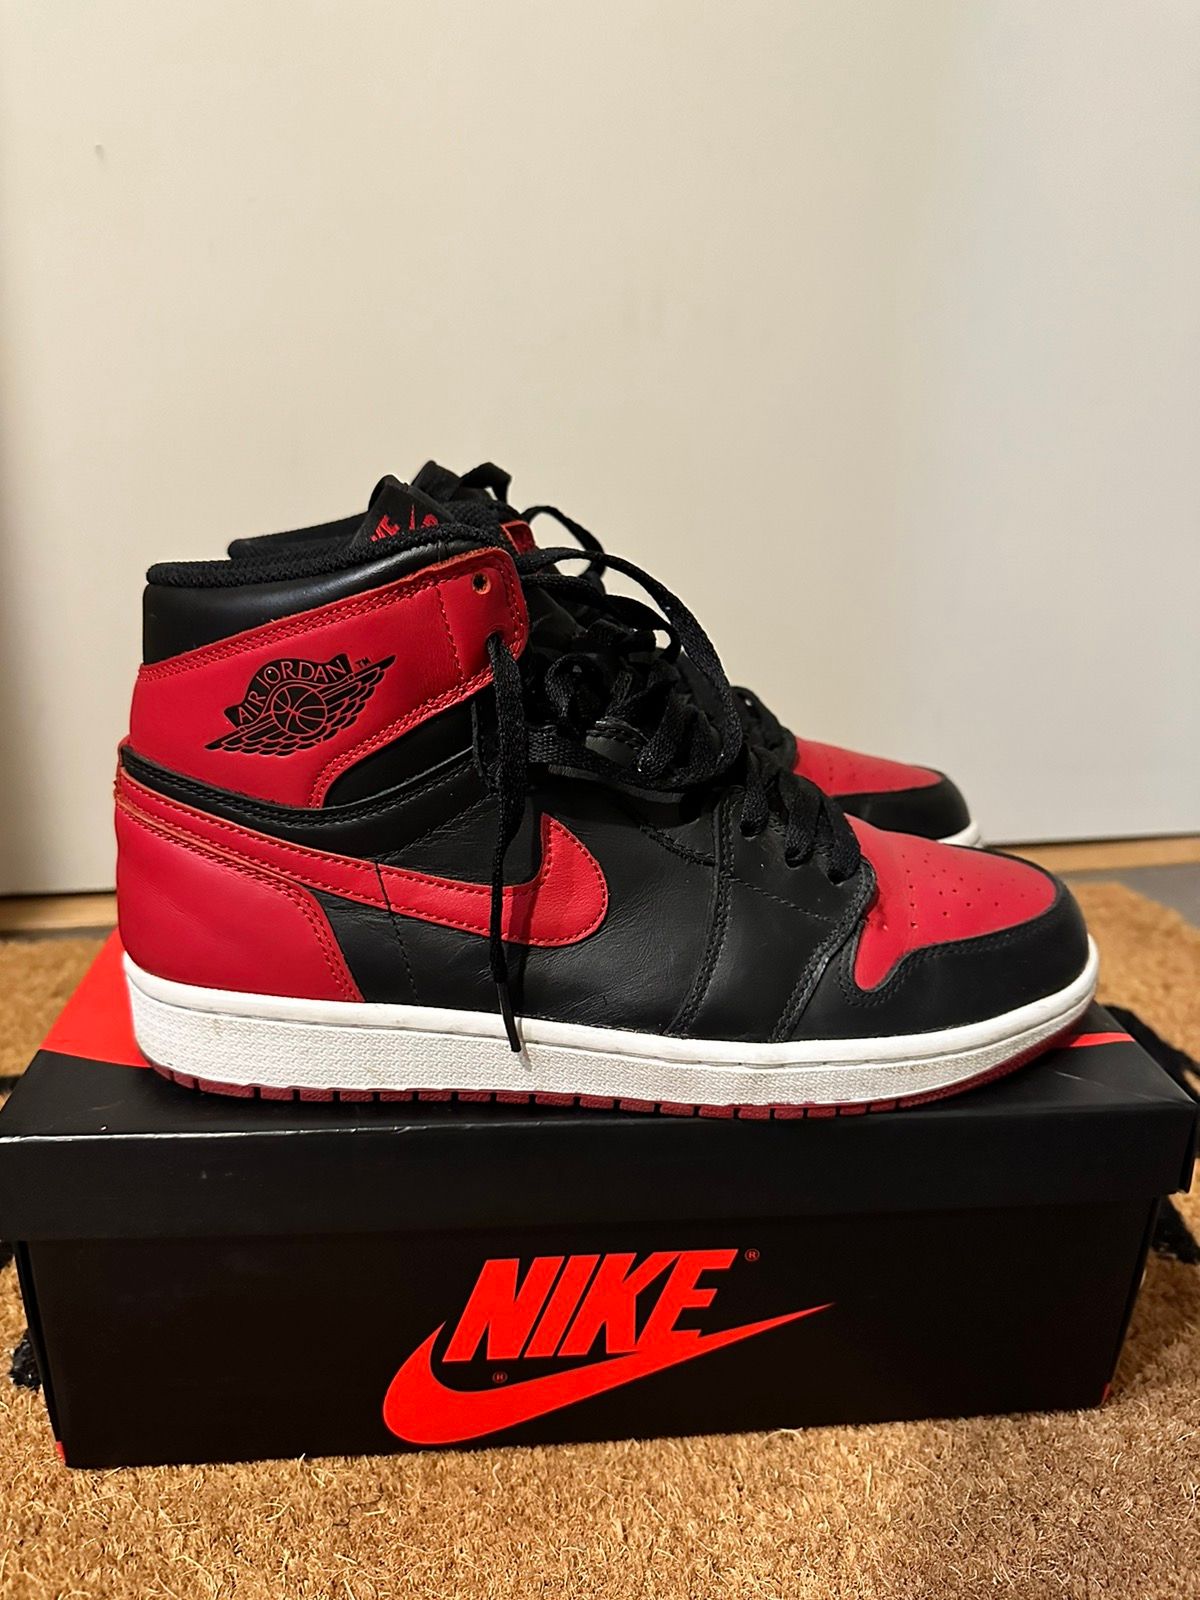 Pre-owned Jordan Brand 1 Retro Bred (2013) Shoes In Black Red